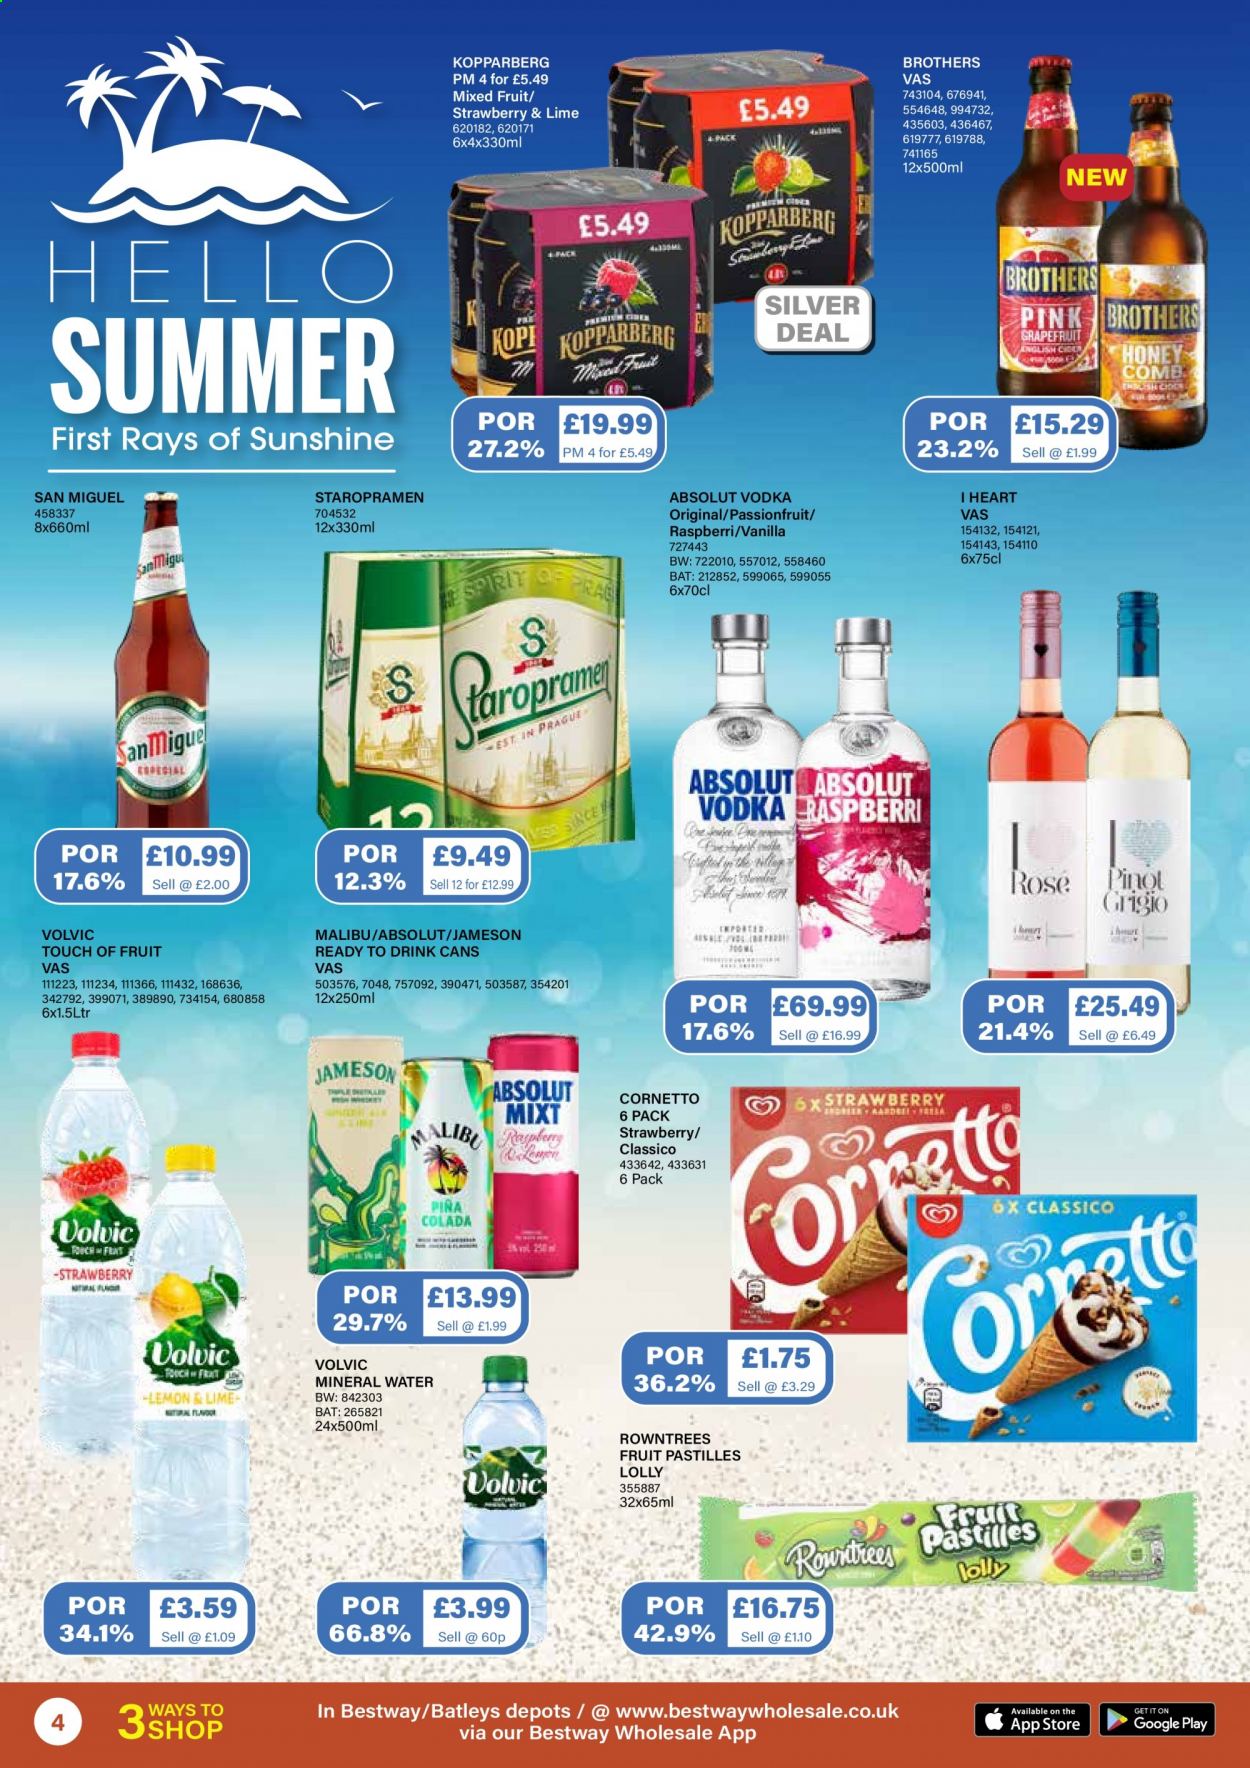 thumbnail - Bestway offer  - 23/04/2021 - 20/05/2021 - Sales products - Kopparberg, San Miguel, grapefruits, Sunshine, Cornetto, lollipop, pastilles, Classico, honey, Volvic, mineral water, white wine, wine, Pinot Grigio, rosé wine, vodka, Jameson, Absolut, BROTHERS, Malibu, comb. Page 4.